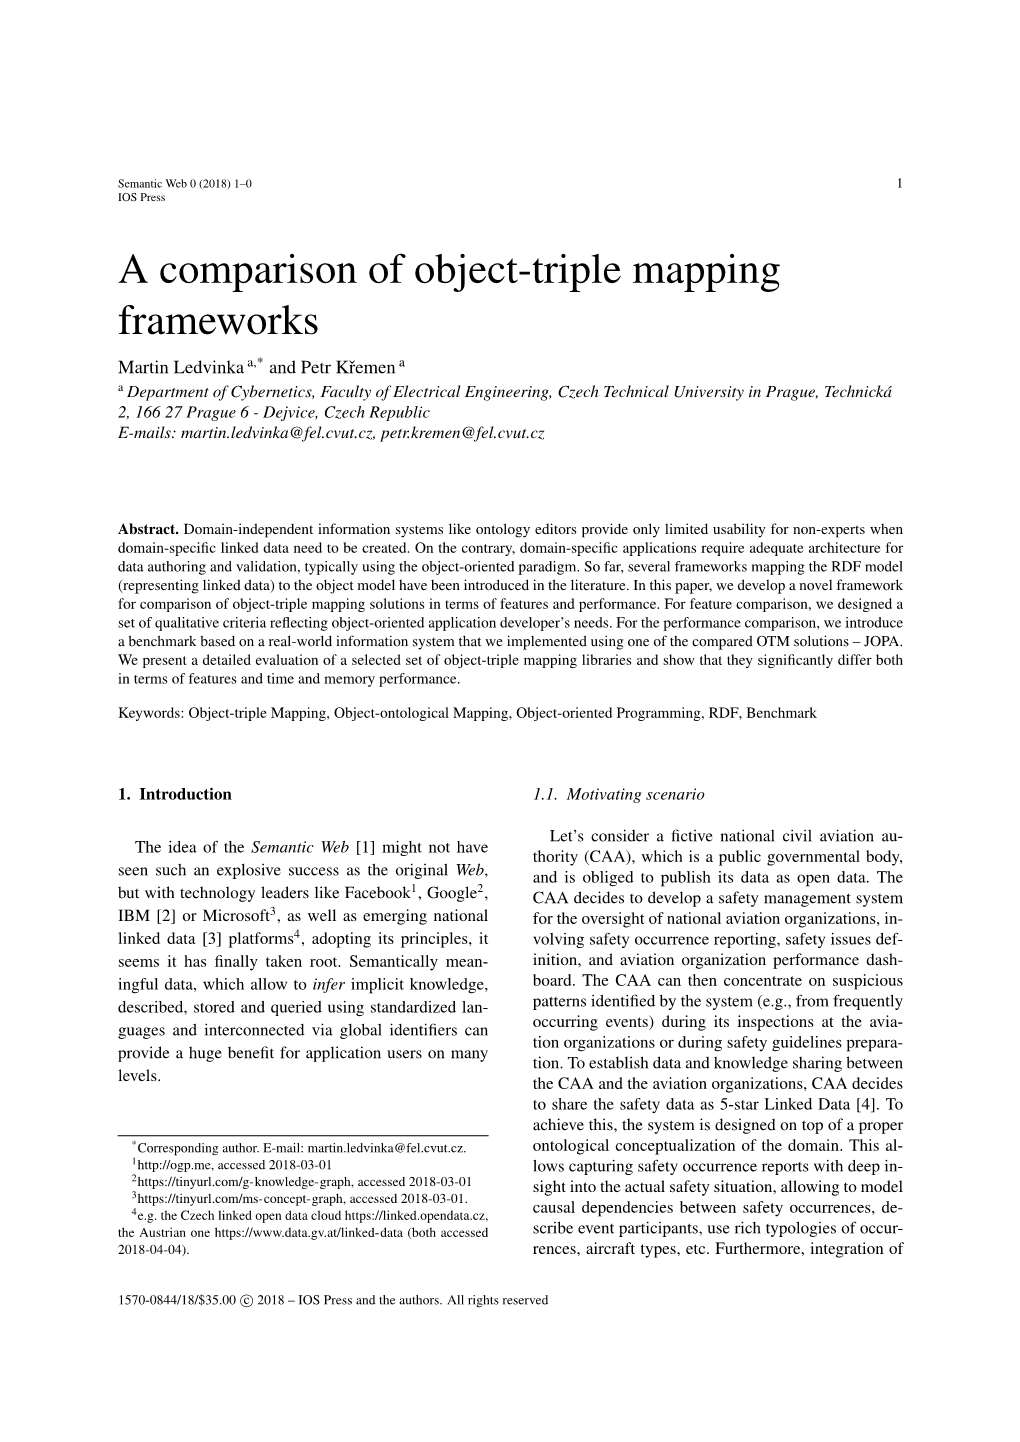 A Comparison of Object-Triple Mapping Frameworks